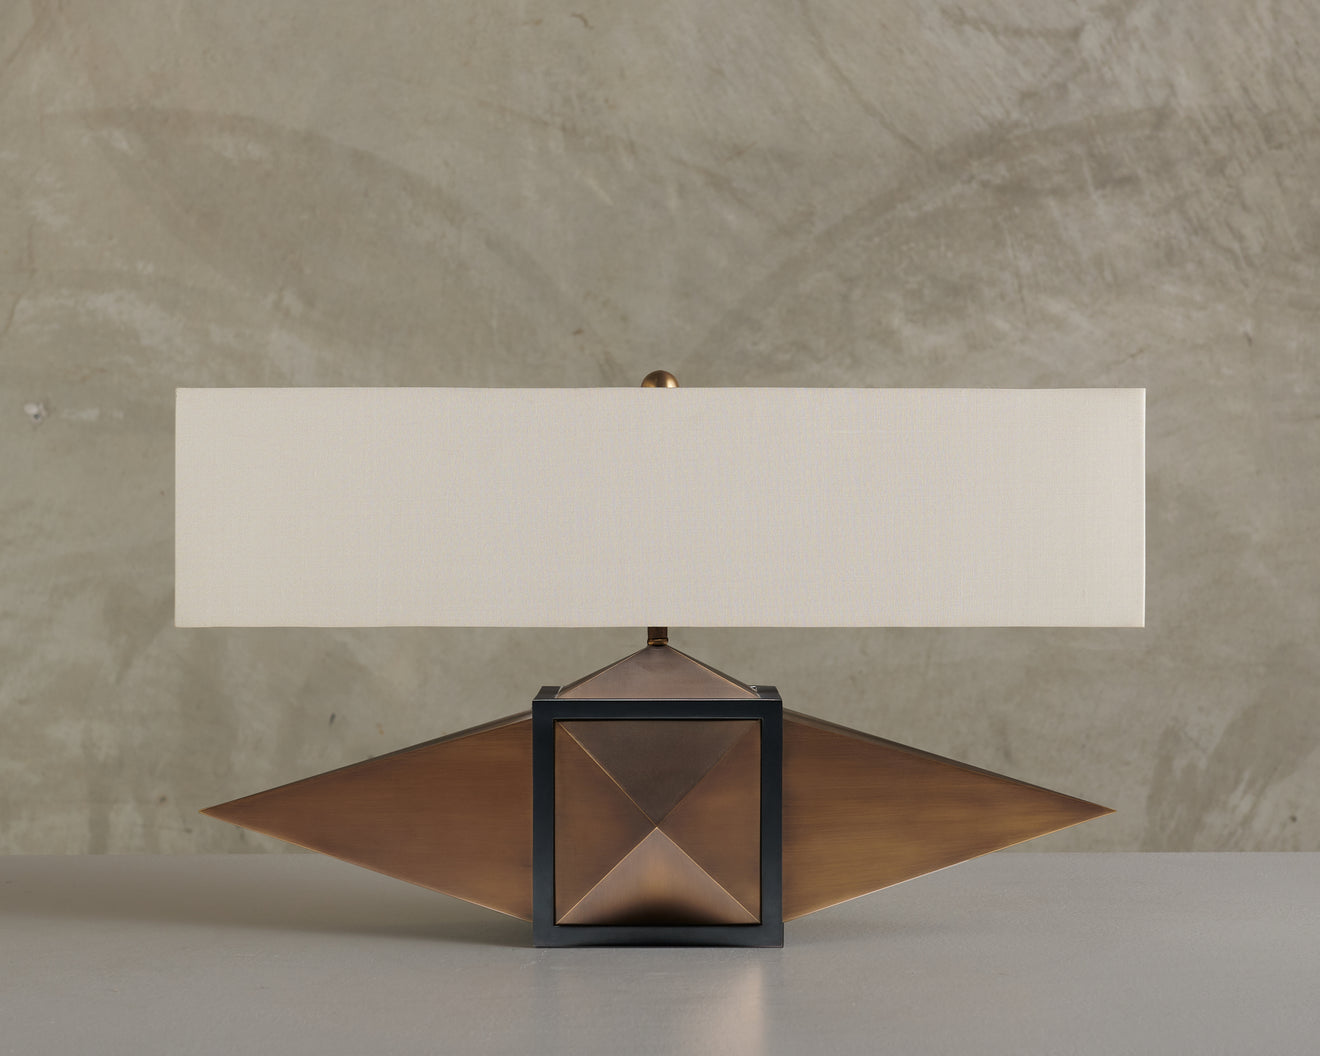 HERKIMER TABLE LAMP BY LIKA MOORE